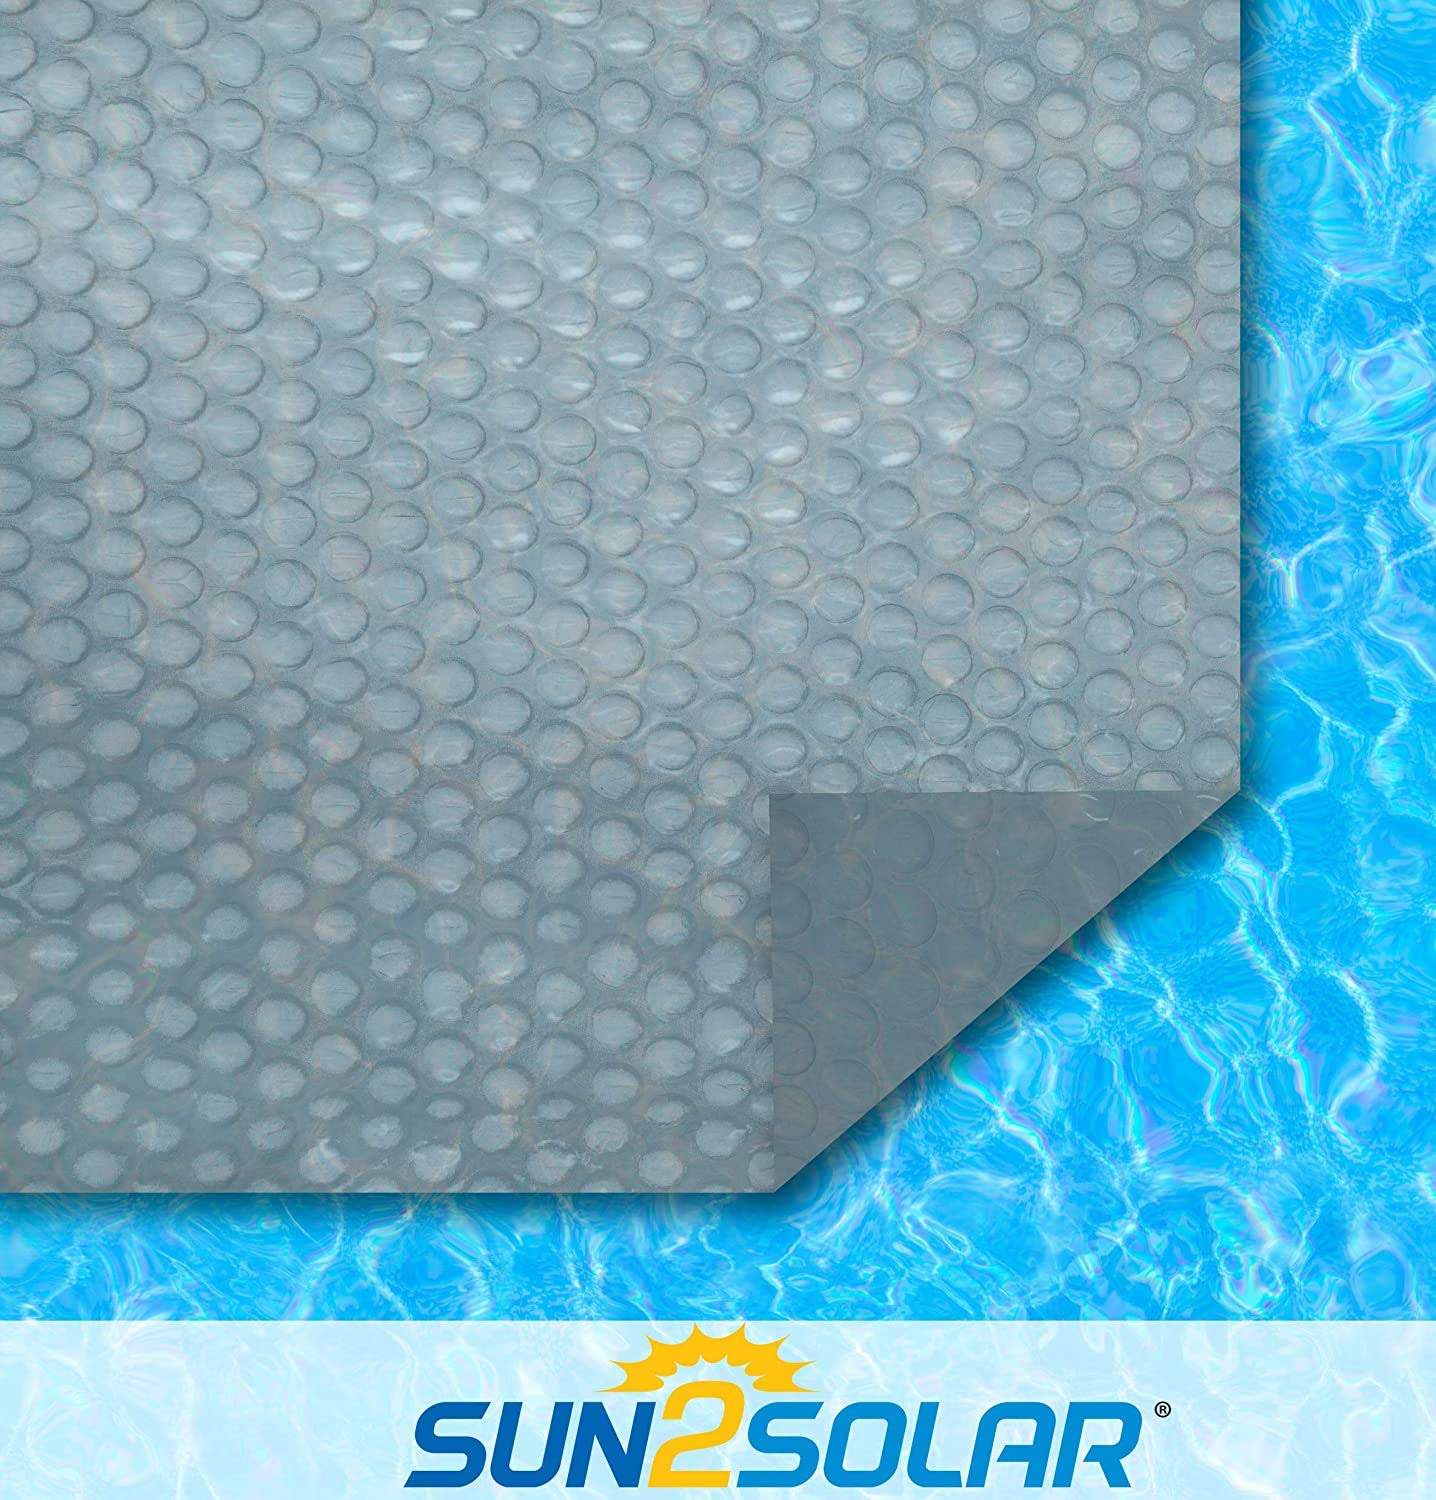 Sun2Solar Blue 18-Foot-by-40-Foot Rectangle Solar Cover | 1600 Series